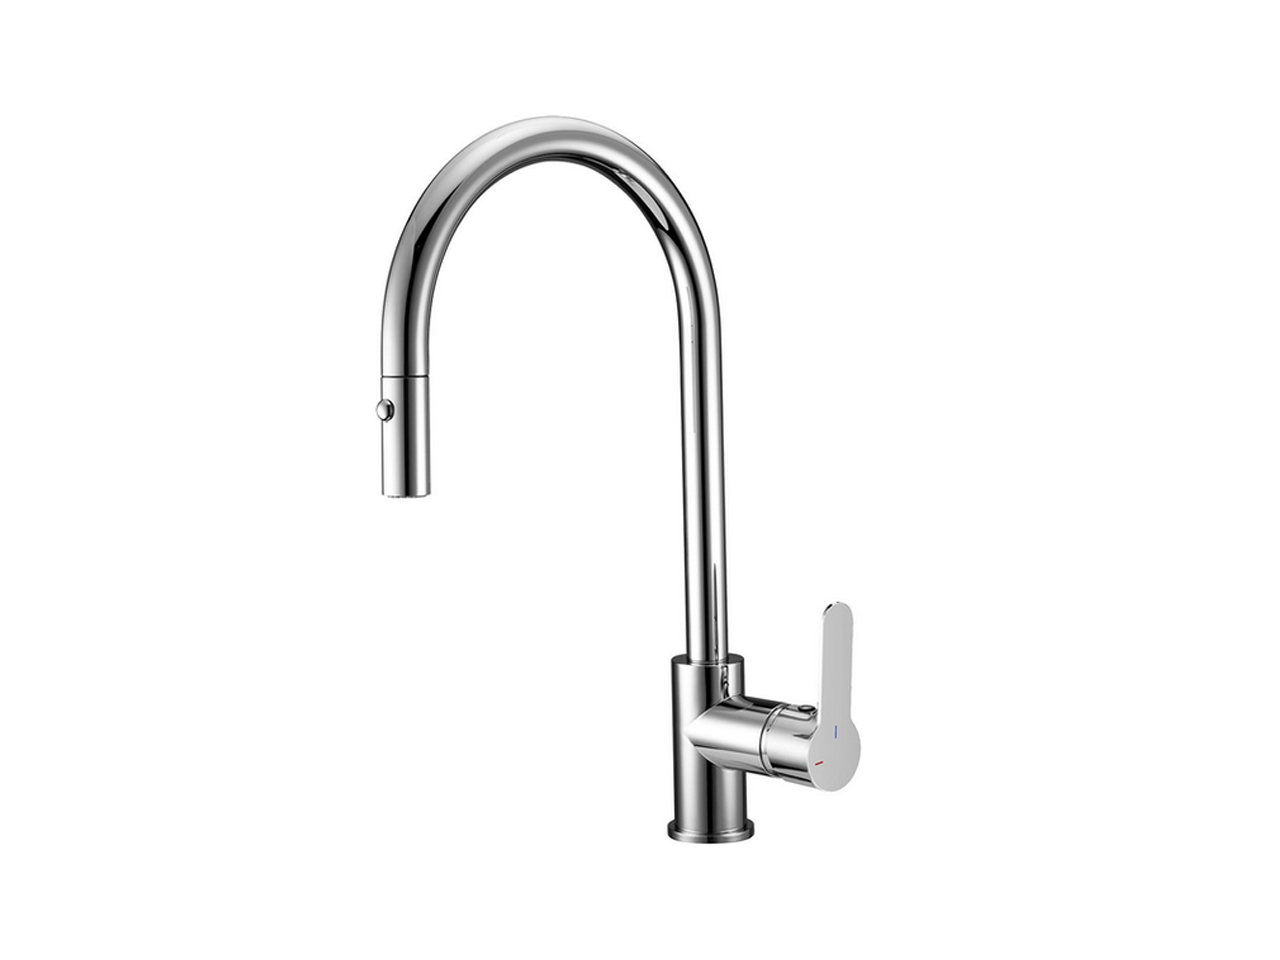 CisalSingle lever sink mixer ES with pull out handspray KITCHEN_C2000575